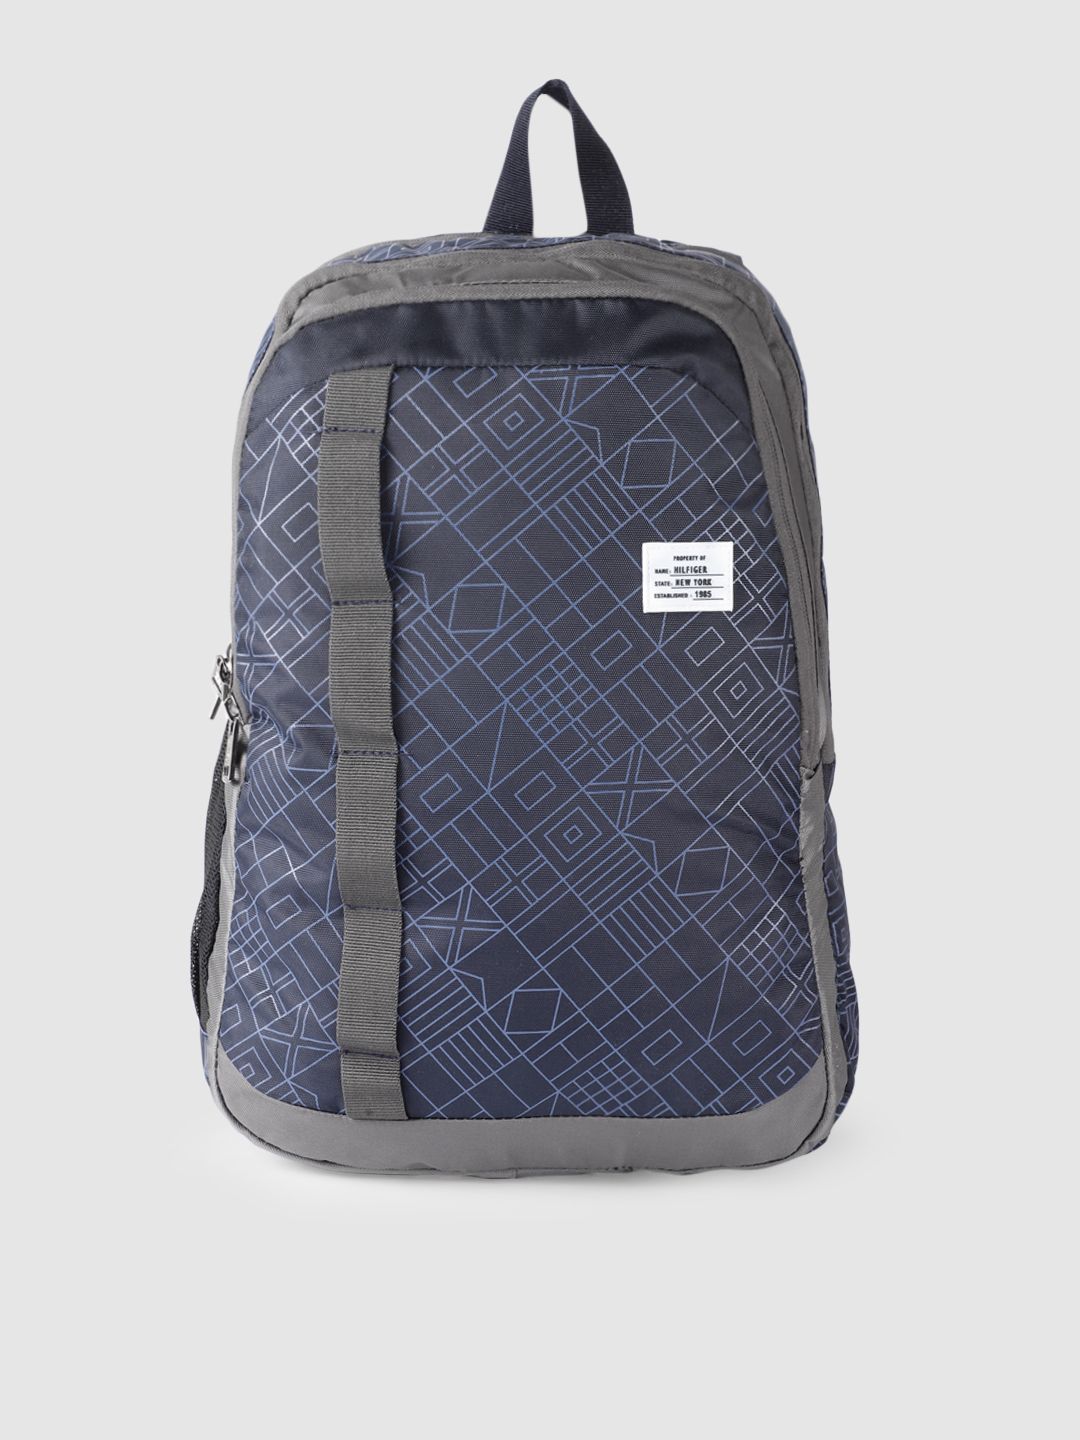 Tommy Hilfiger Unisex Navy Blue Graphic Backpack Price in India